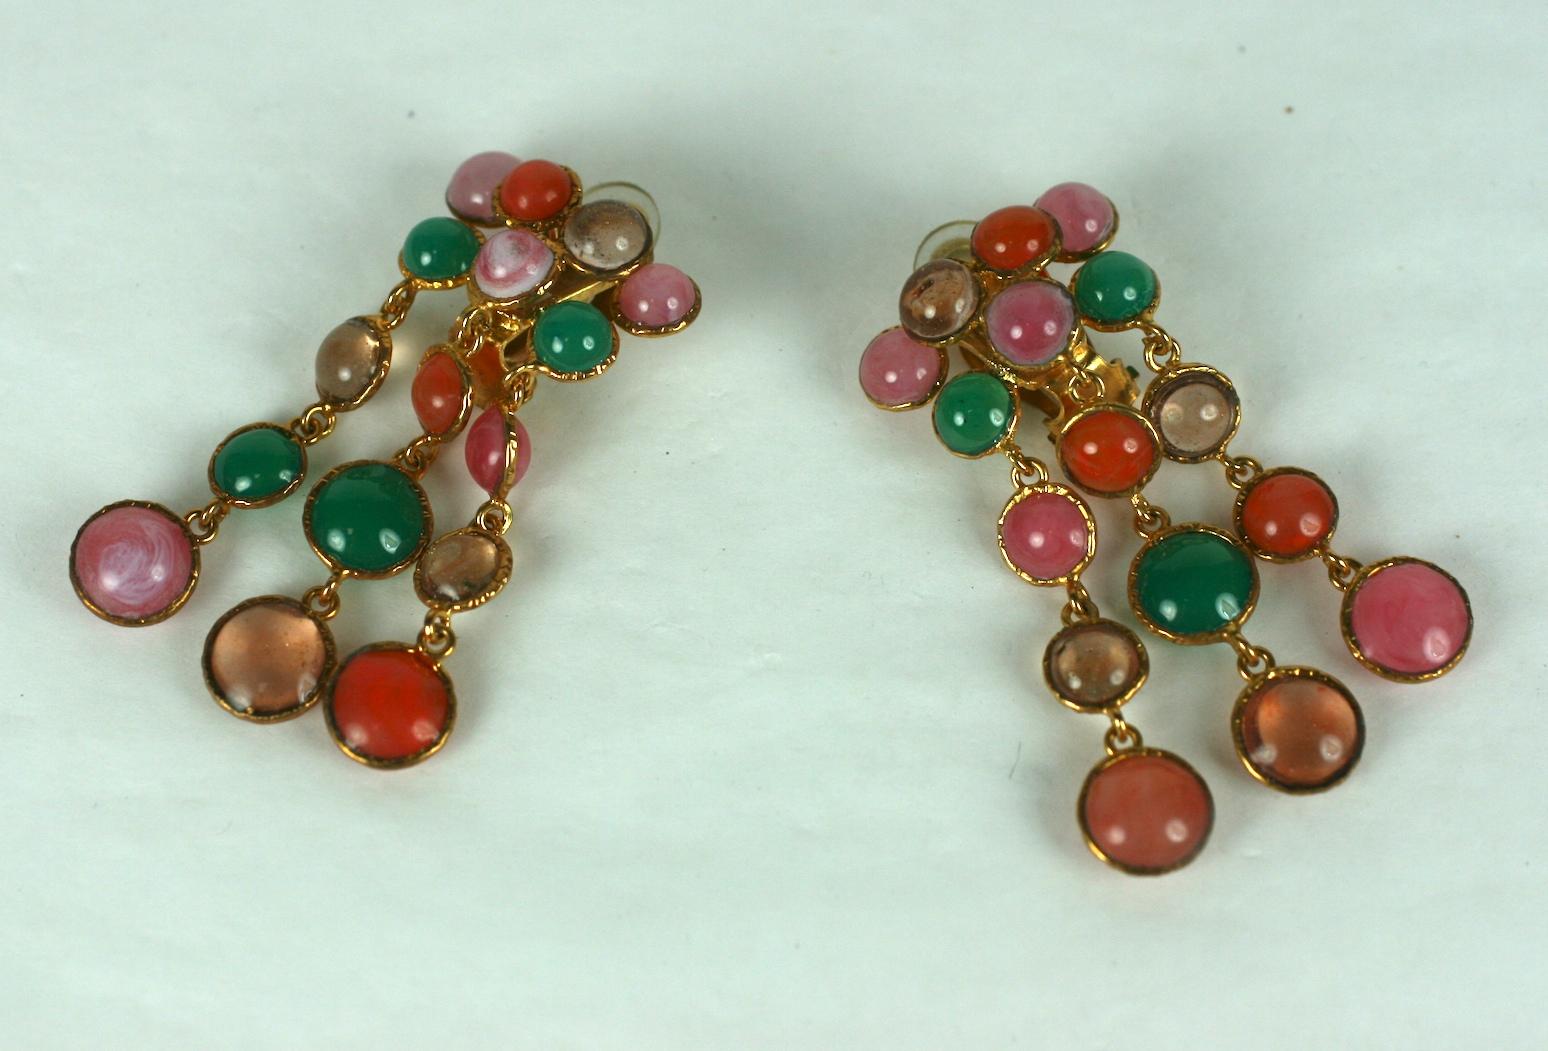 Women's MWLC Harlequin Pastille Poured Glass Earclips For Sale